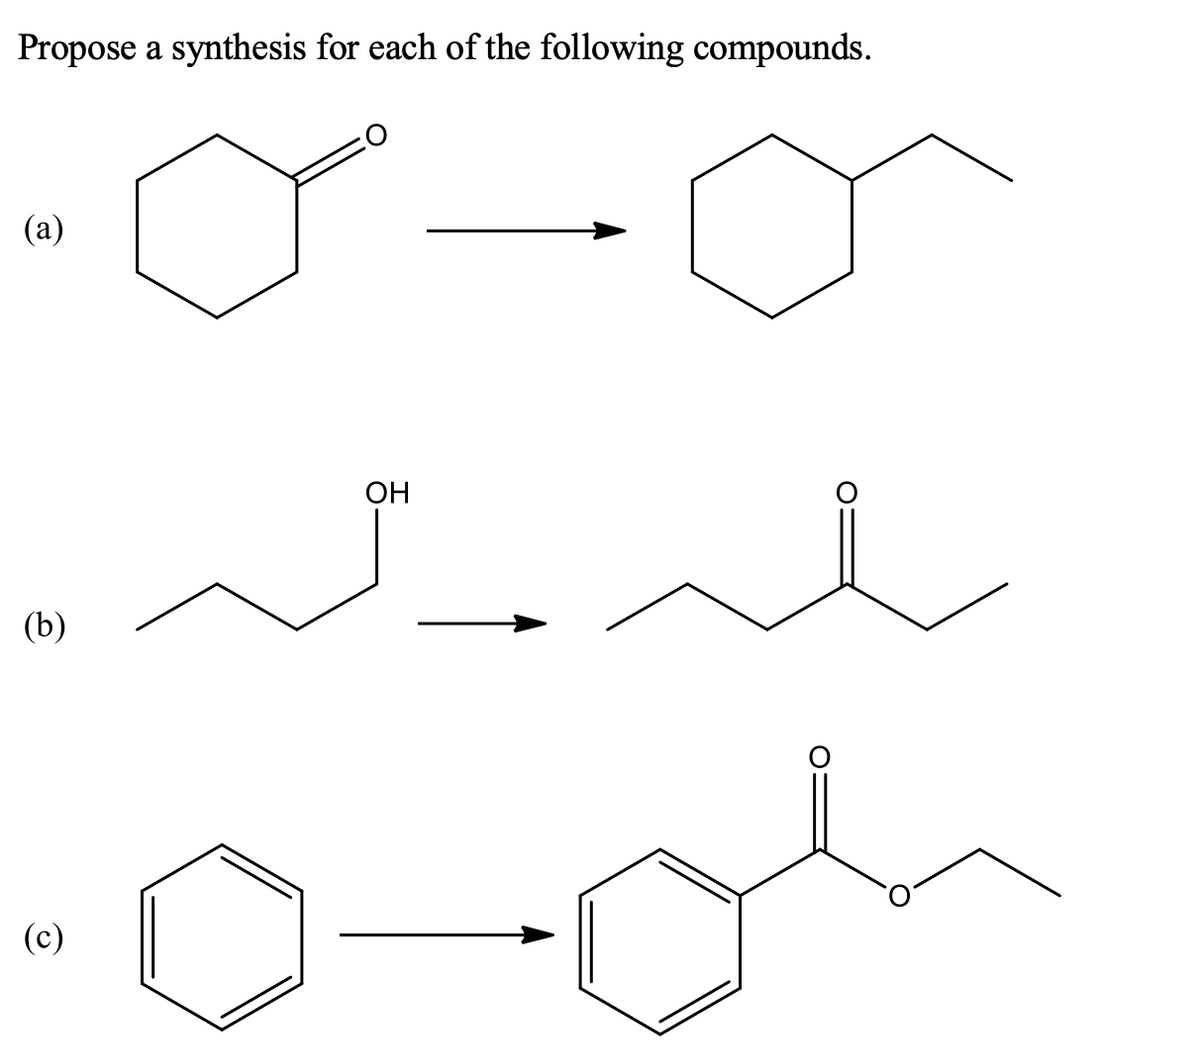 Propose a synthesis for each of the following compounds.
(a)
OH
(b)
(c)
